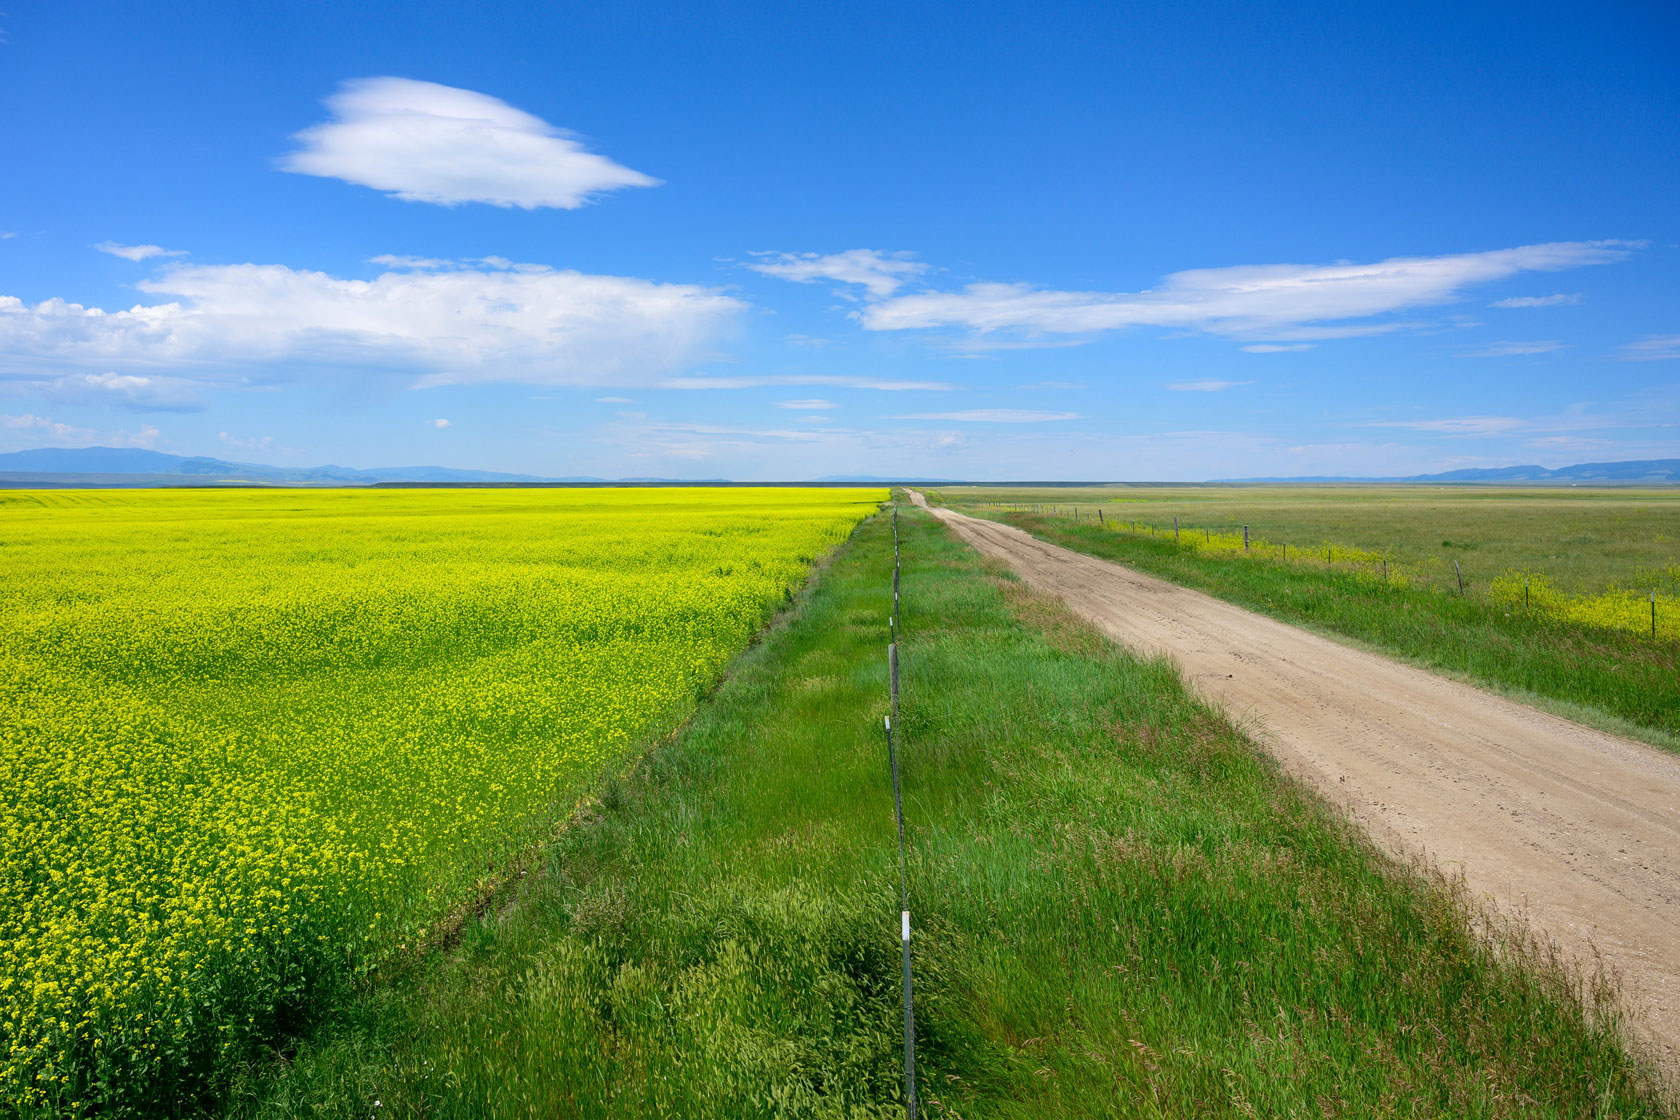 Photo shows a yellow and green clover field next to a dirt road on a sunny day.